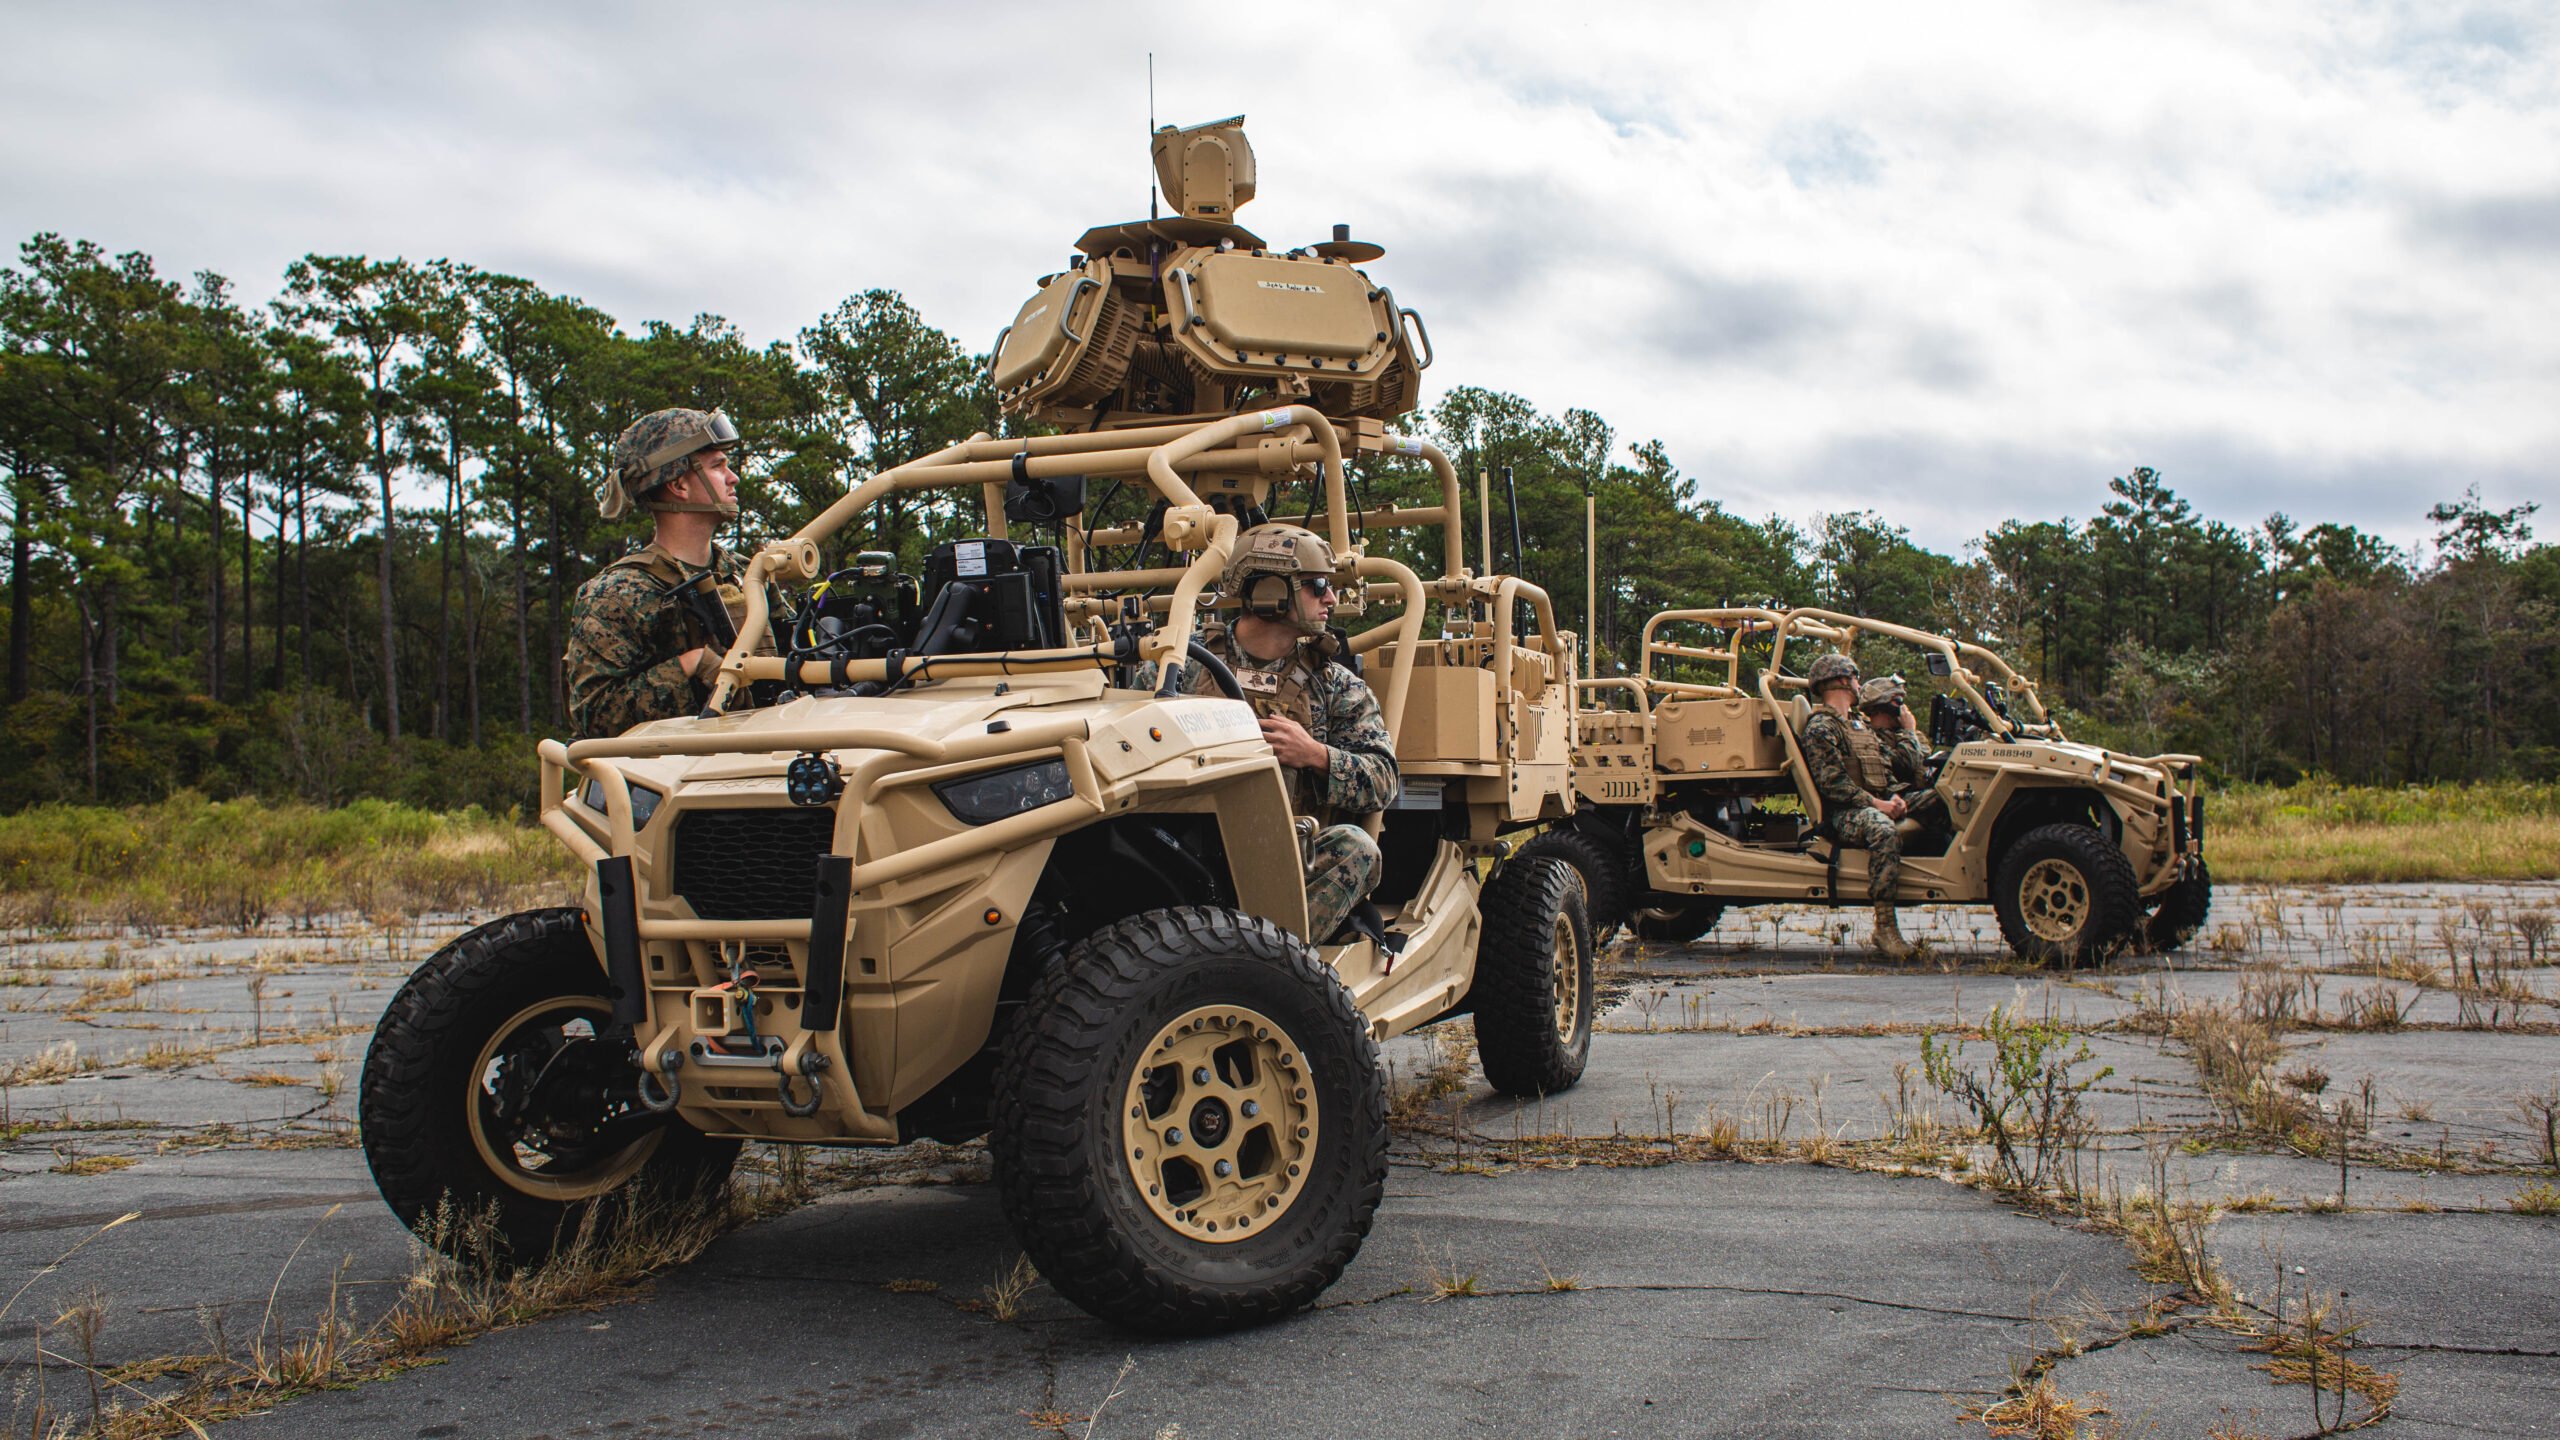 USMC’s ground-based air defense focusing on quick rollouts, official says